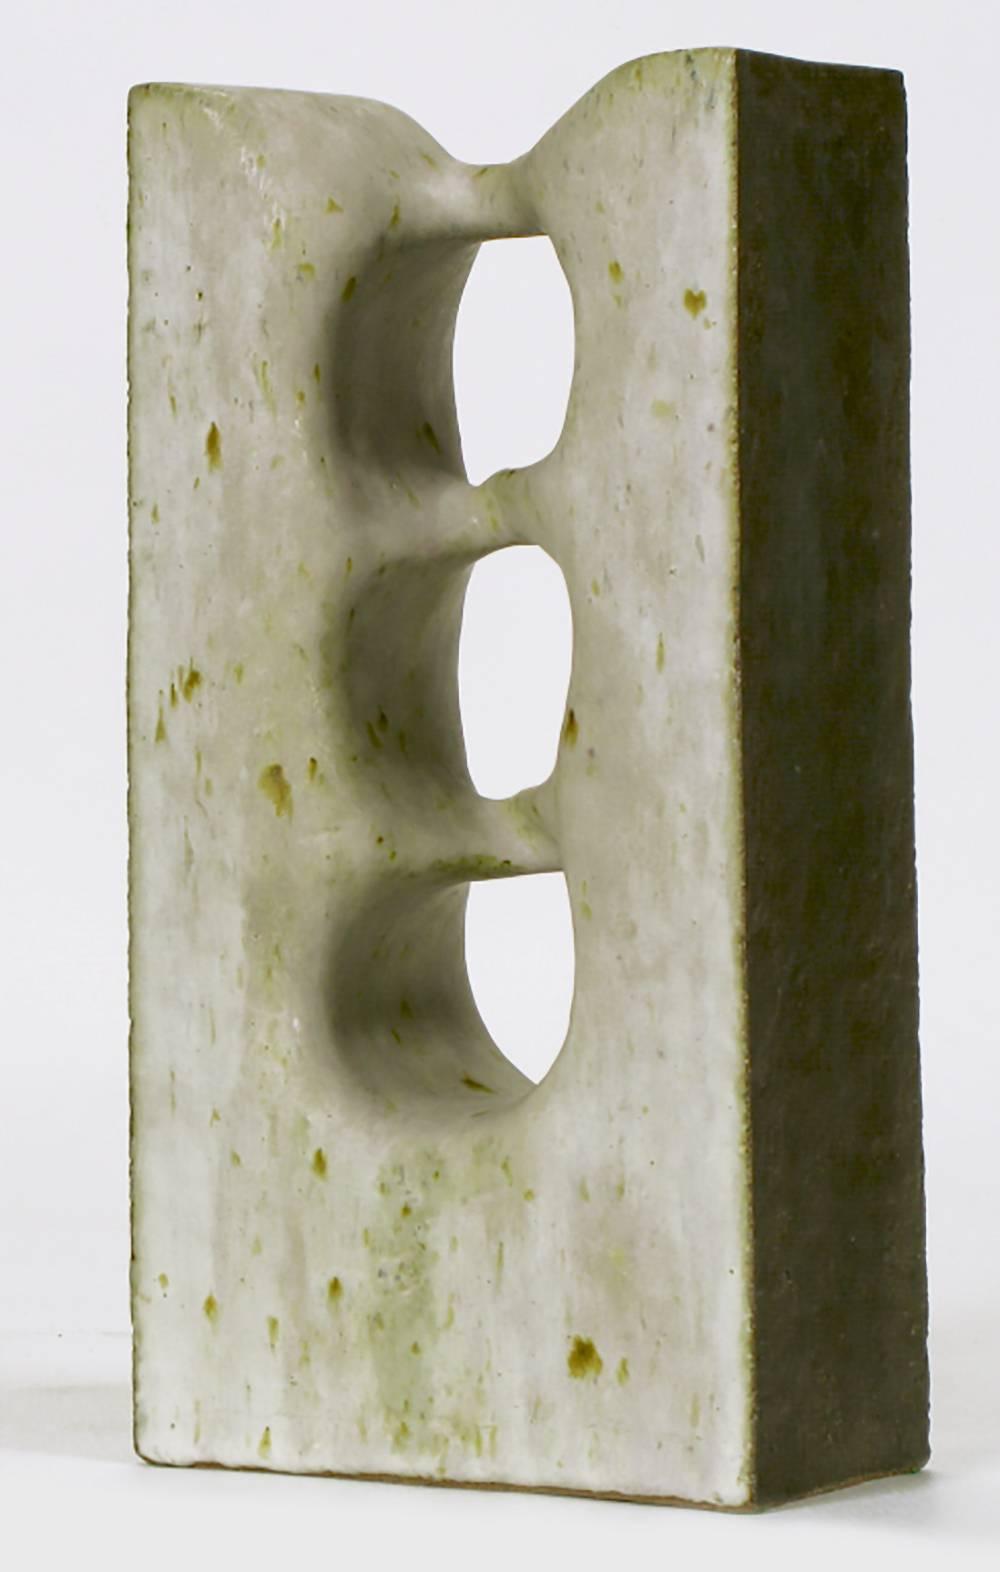 Glazed 1967 Double-Sided Abstract Ceramic Sculpture by Tomiya Matsuda (1939-2011)